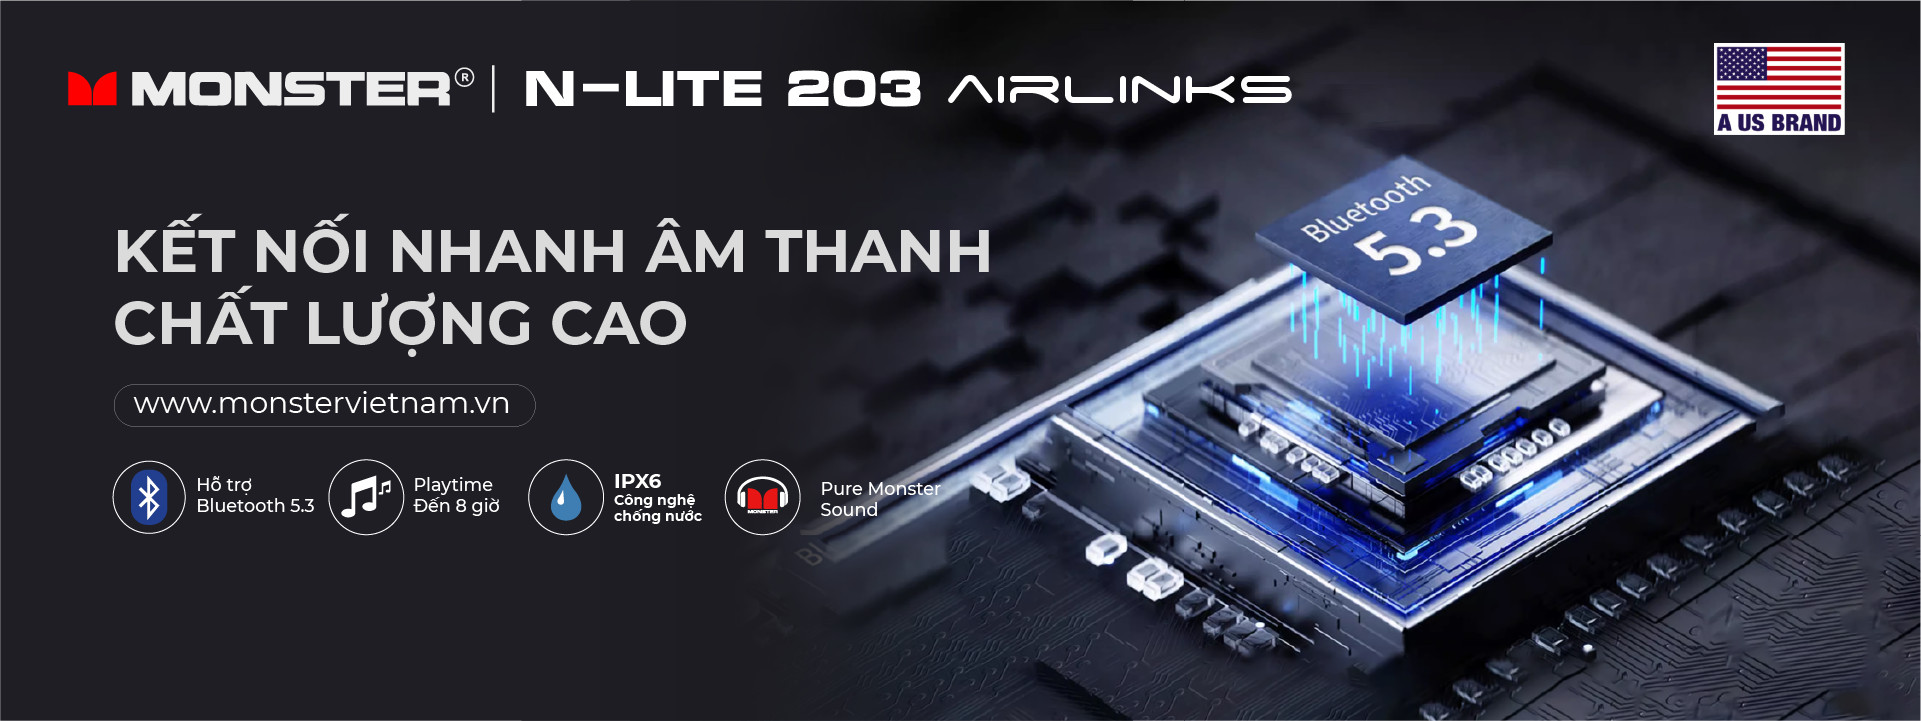 Tai nghe True Wireless chống nước Monster N-Lite 203 AirLink | Anh Duy Audio